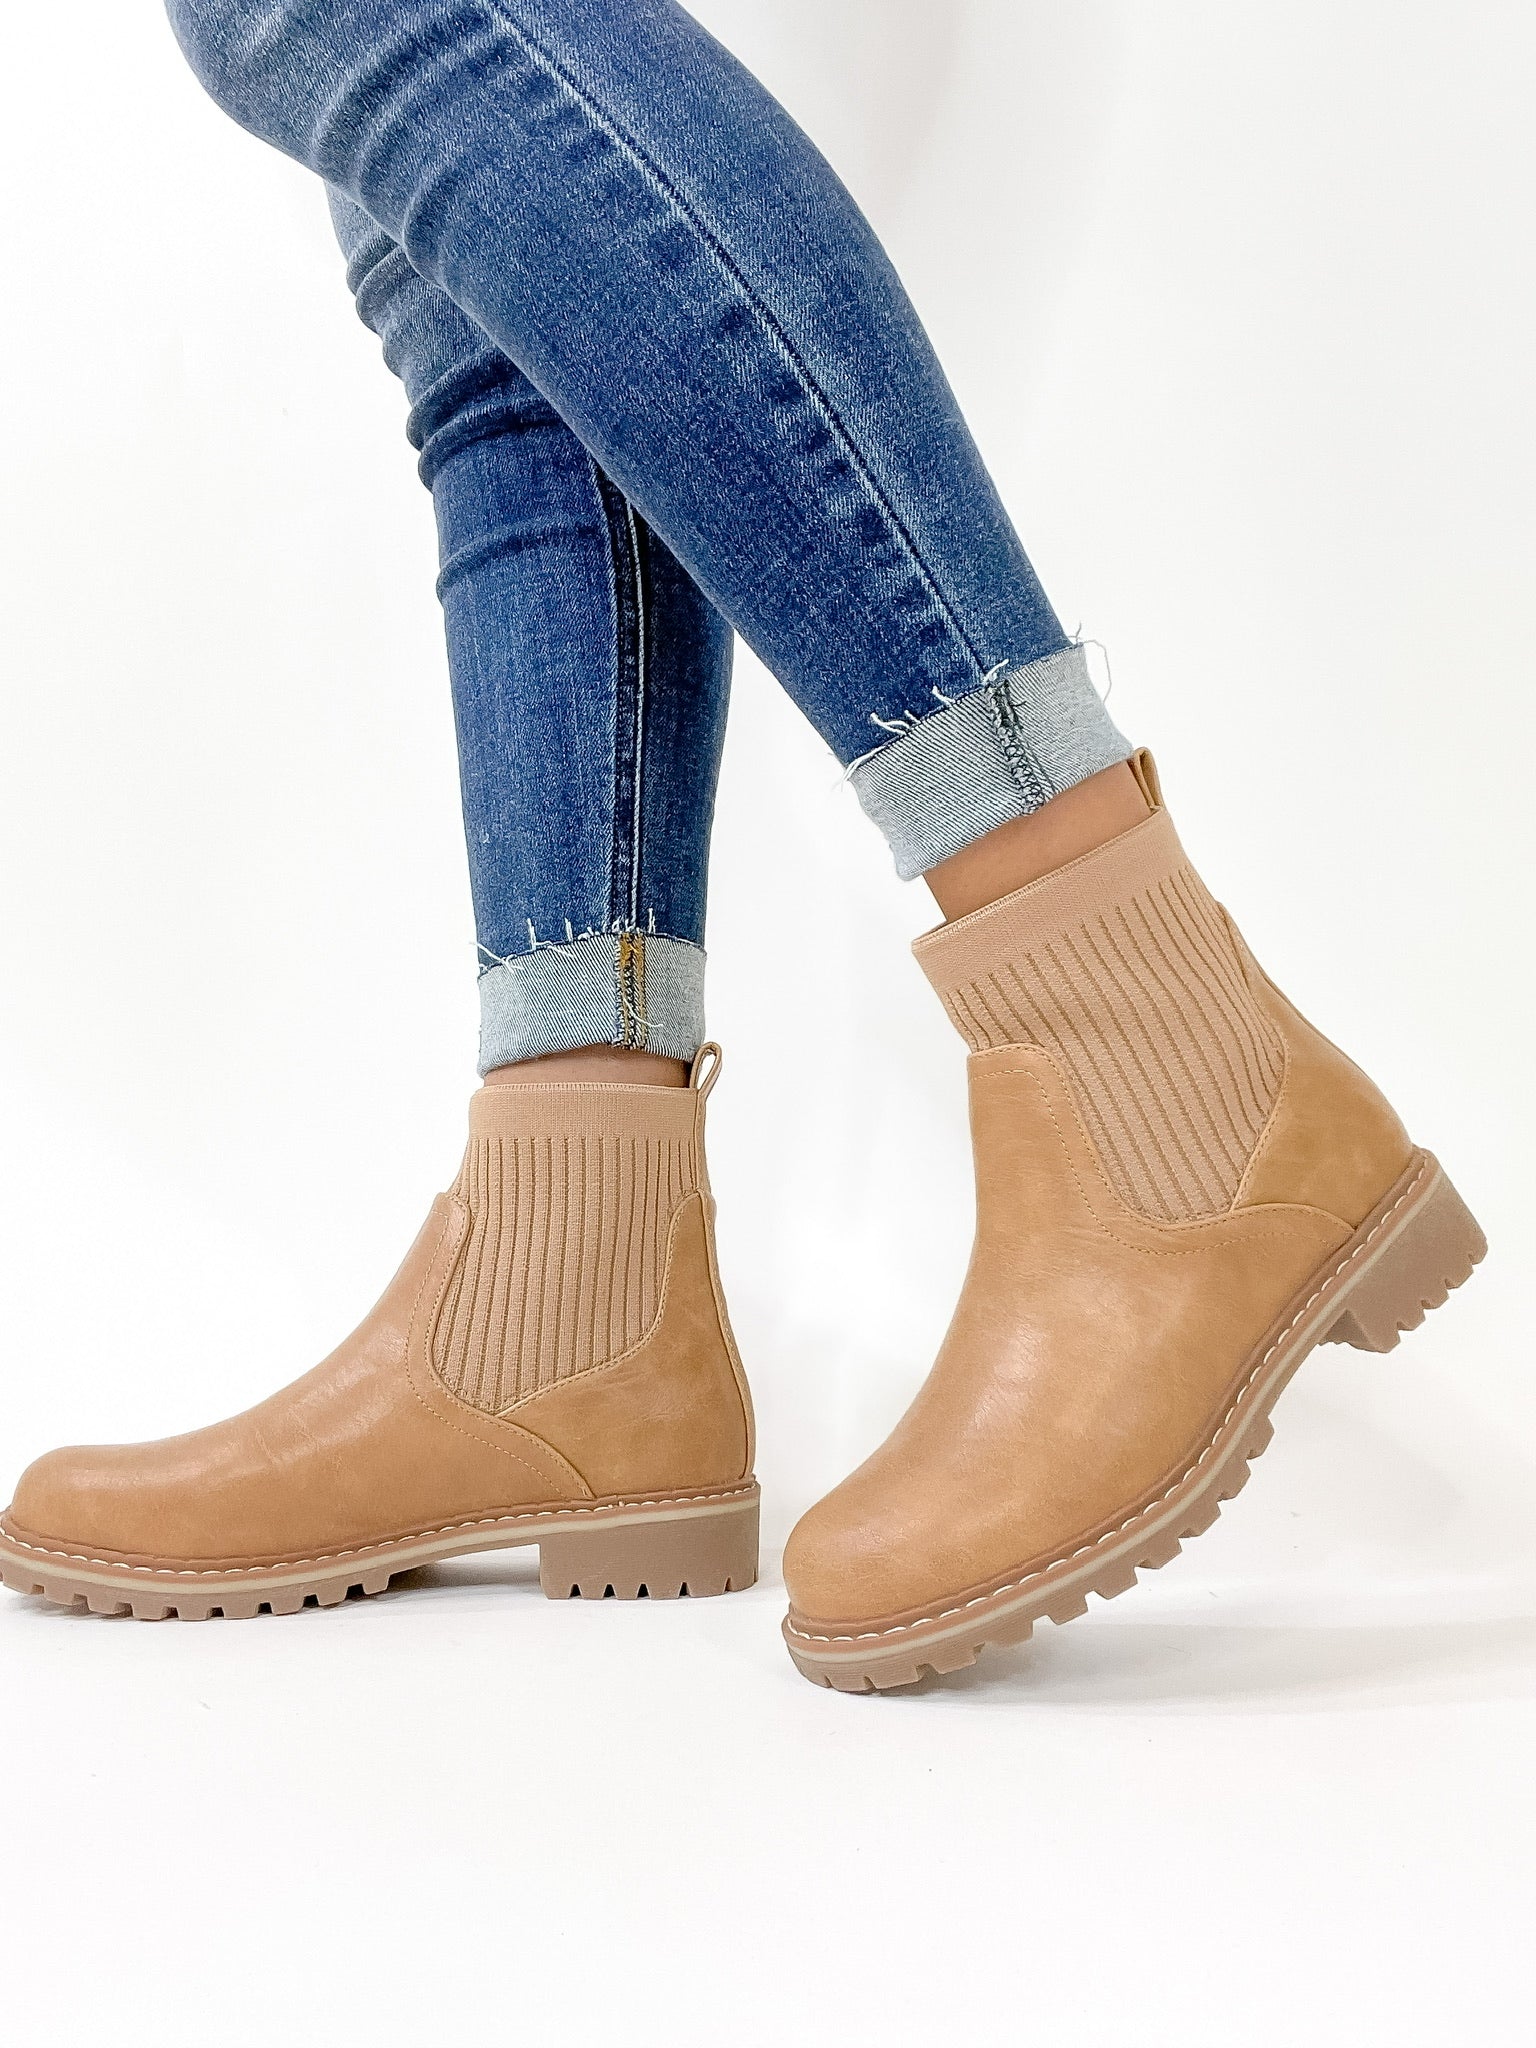 Corky's | Cabin Fever Slip On Booties in Caramel Tan - Giddy Up Glamour Boutique